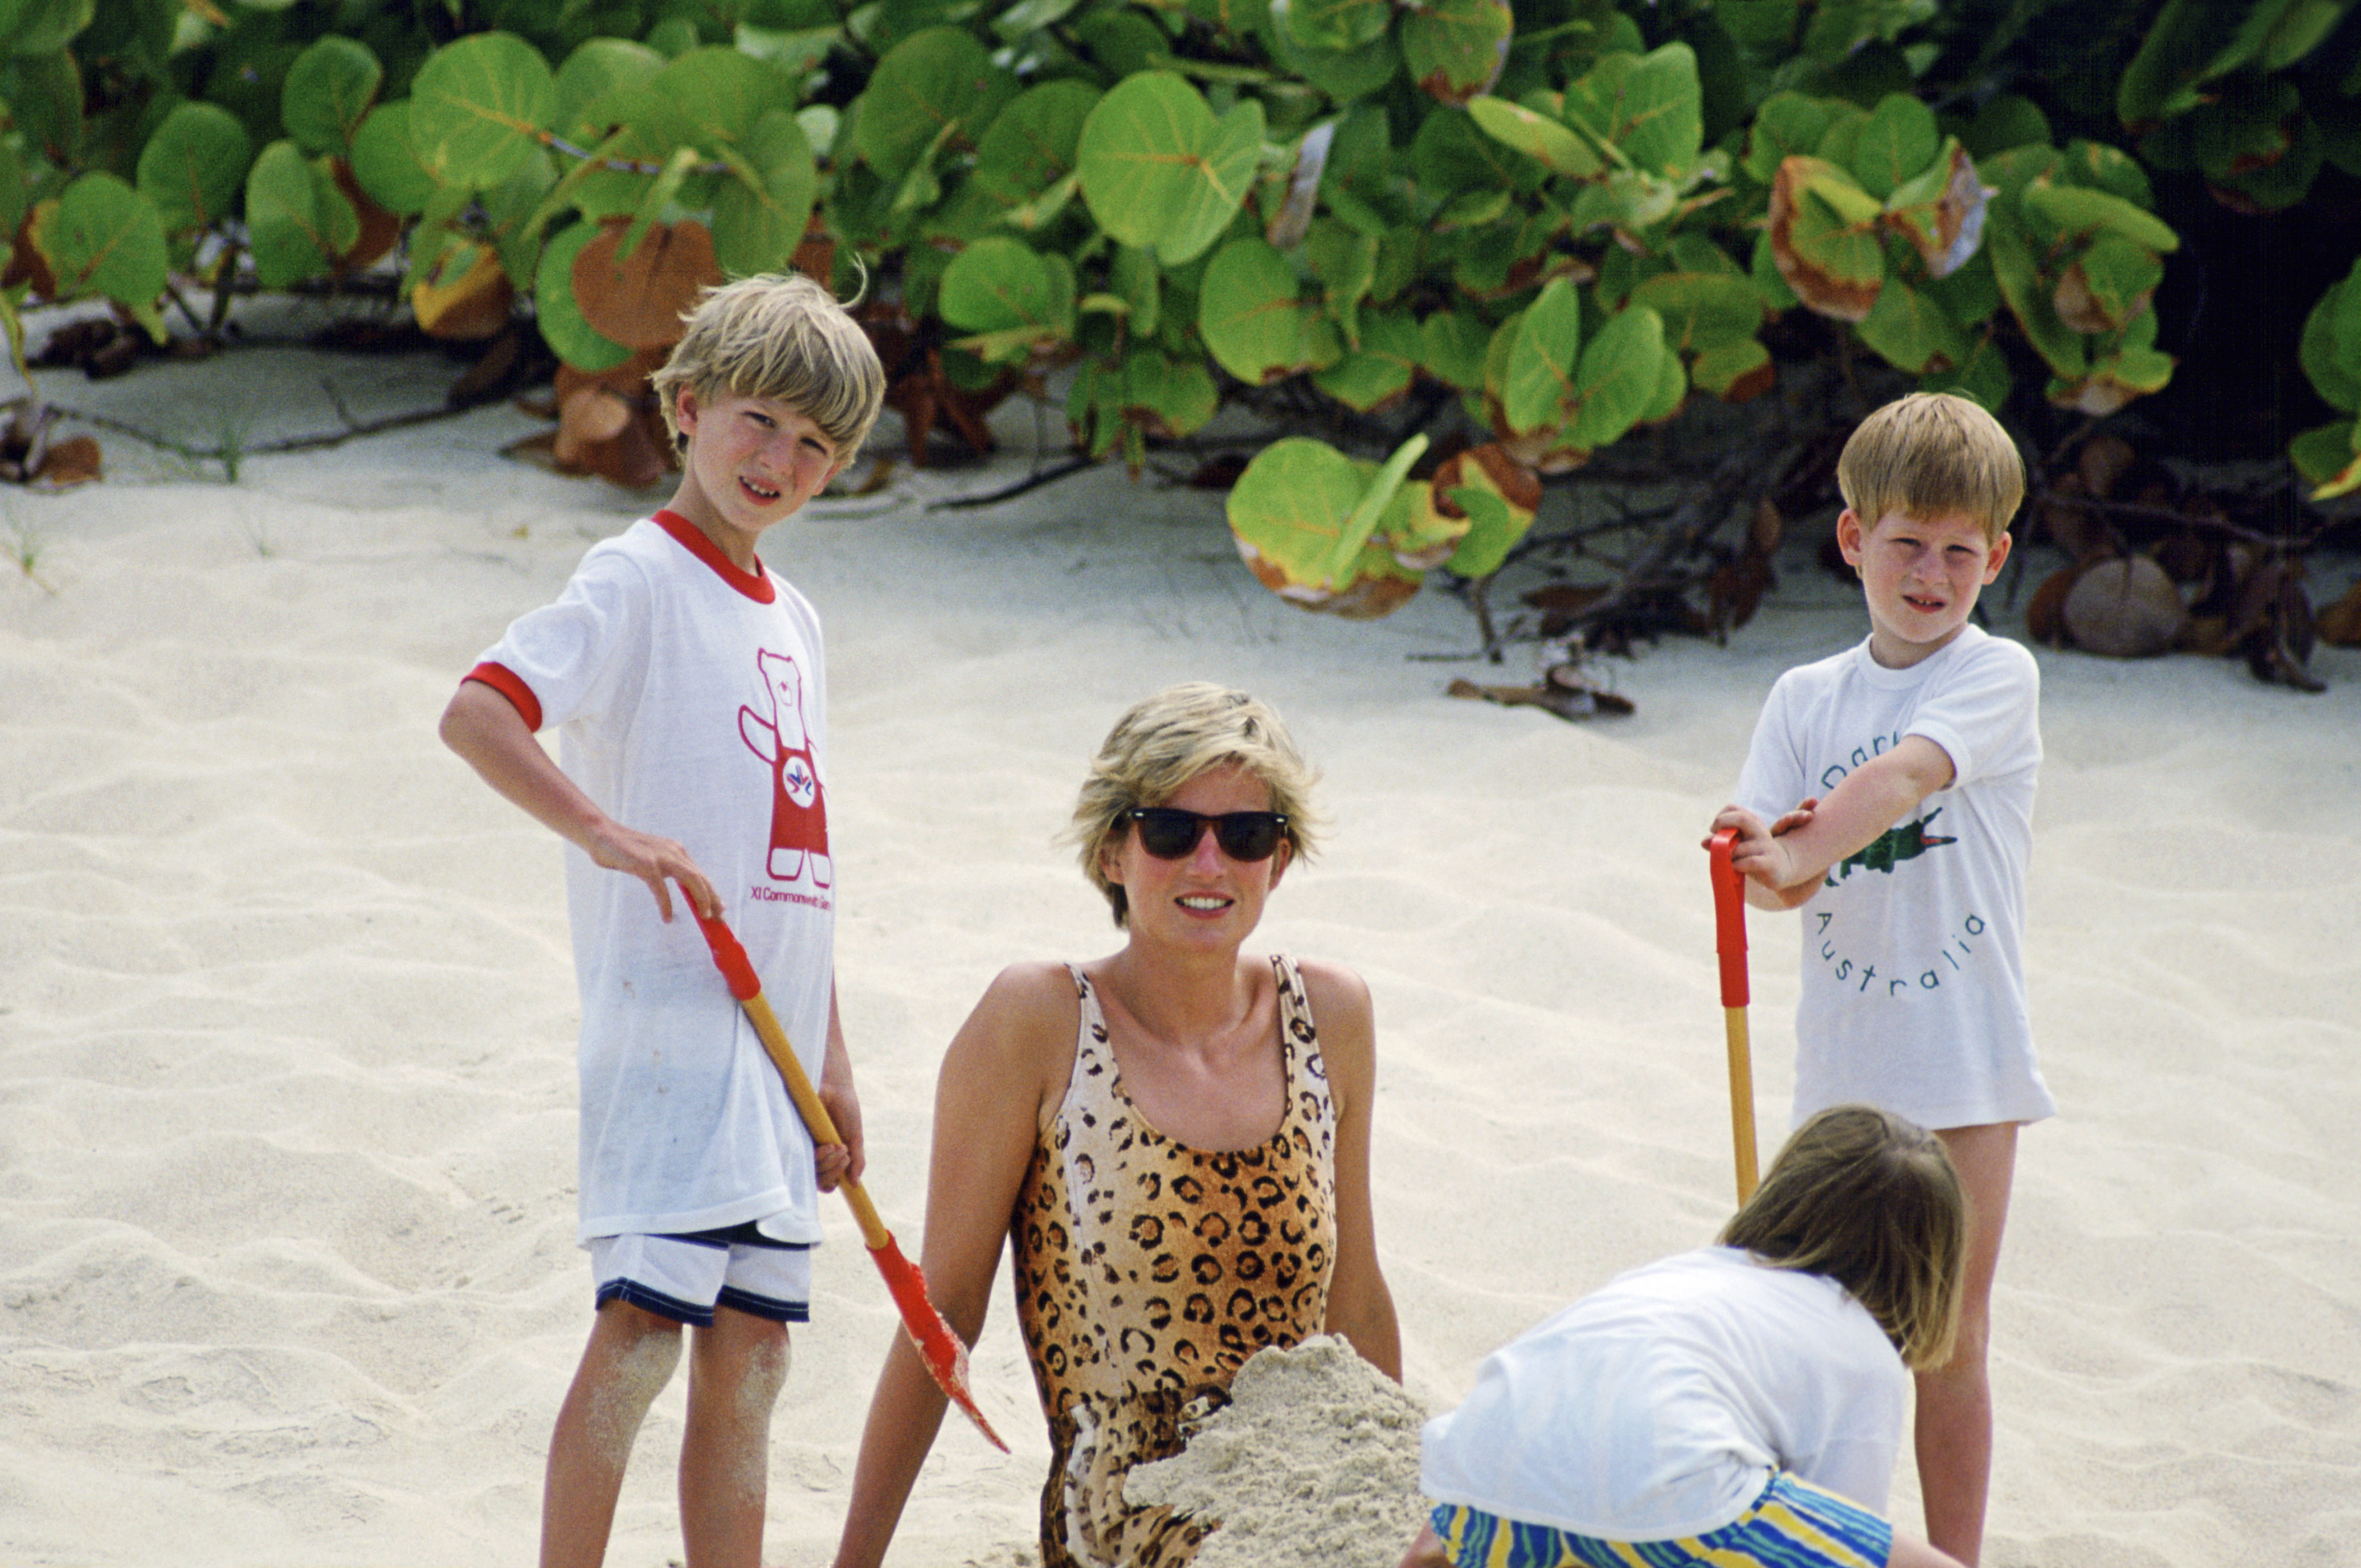 Diana, Princess of Wales with her sons and her sister's children on April 11, 1990 in Necker Island | Source: Getty Images